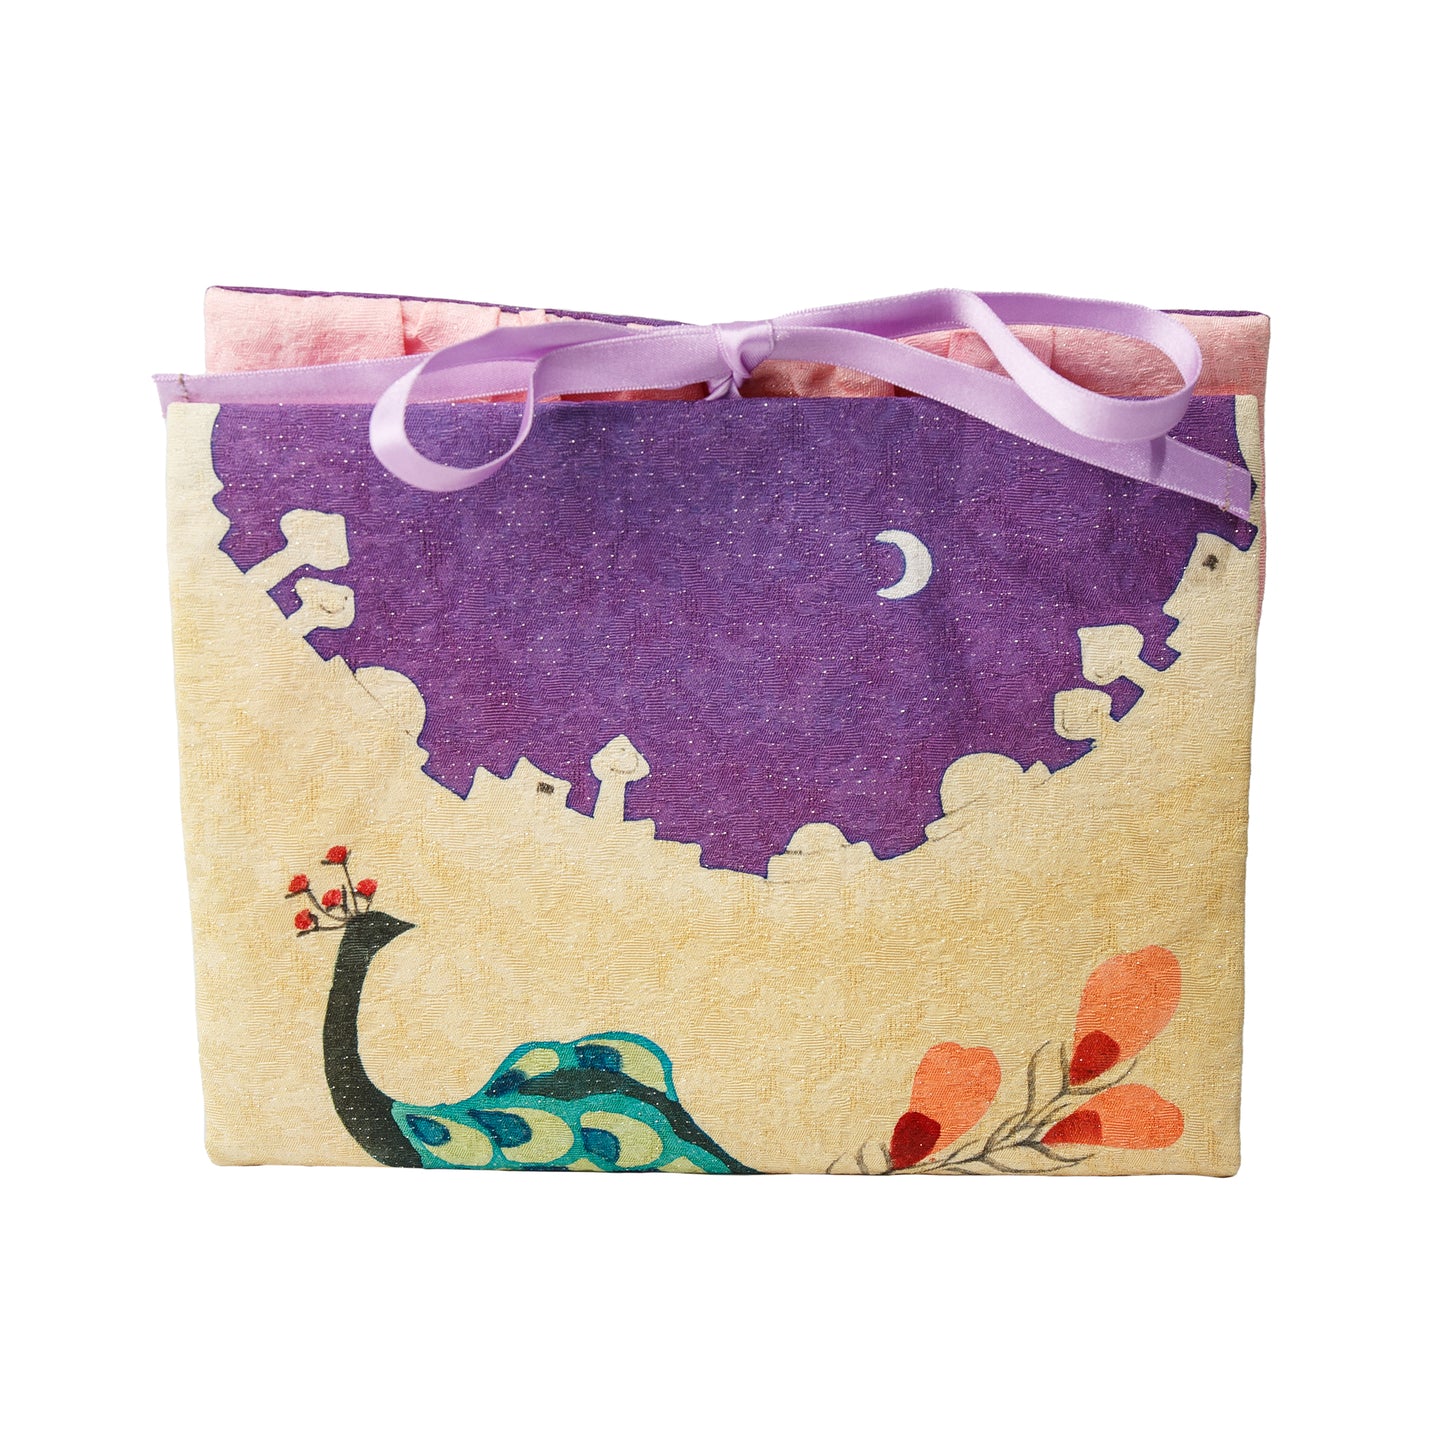 Primary image of Small Lingerie Pouch - Purple